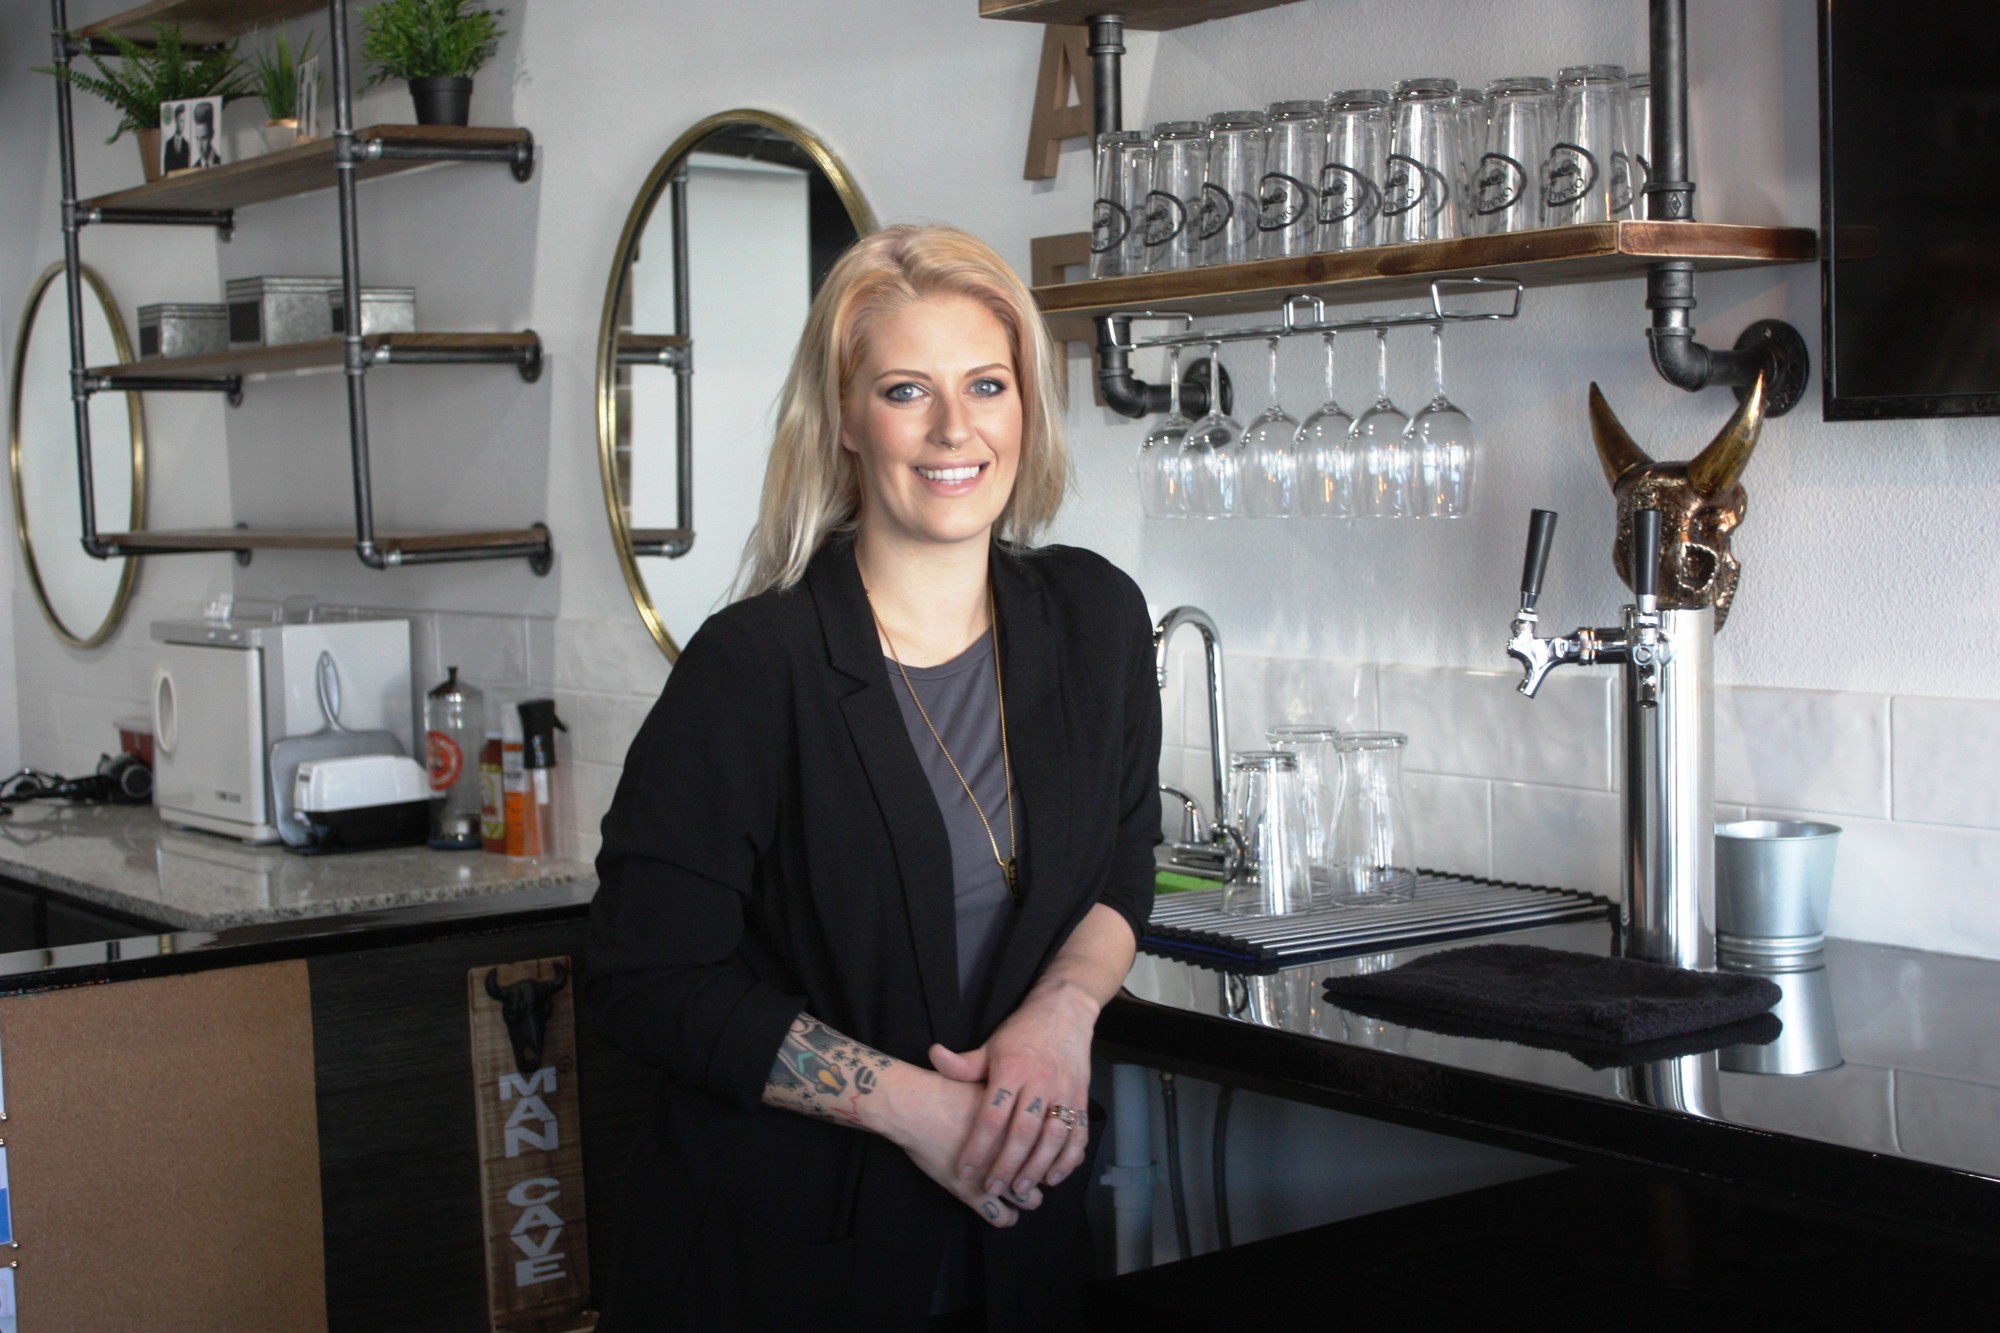 Ashly Rose, owner/stylist at Doll Face Hair Finery, has opened the Men’s Refinery, a salon for men where craft beer is also sold. Photo by Wayne Grant